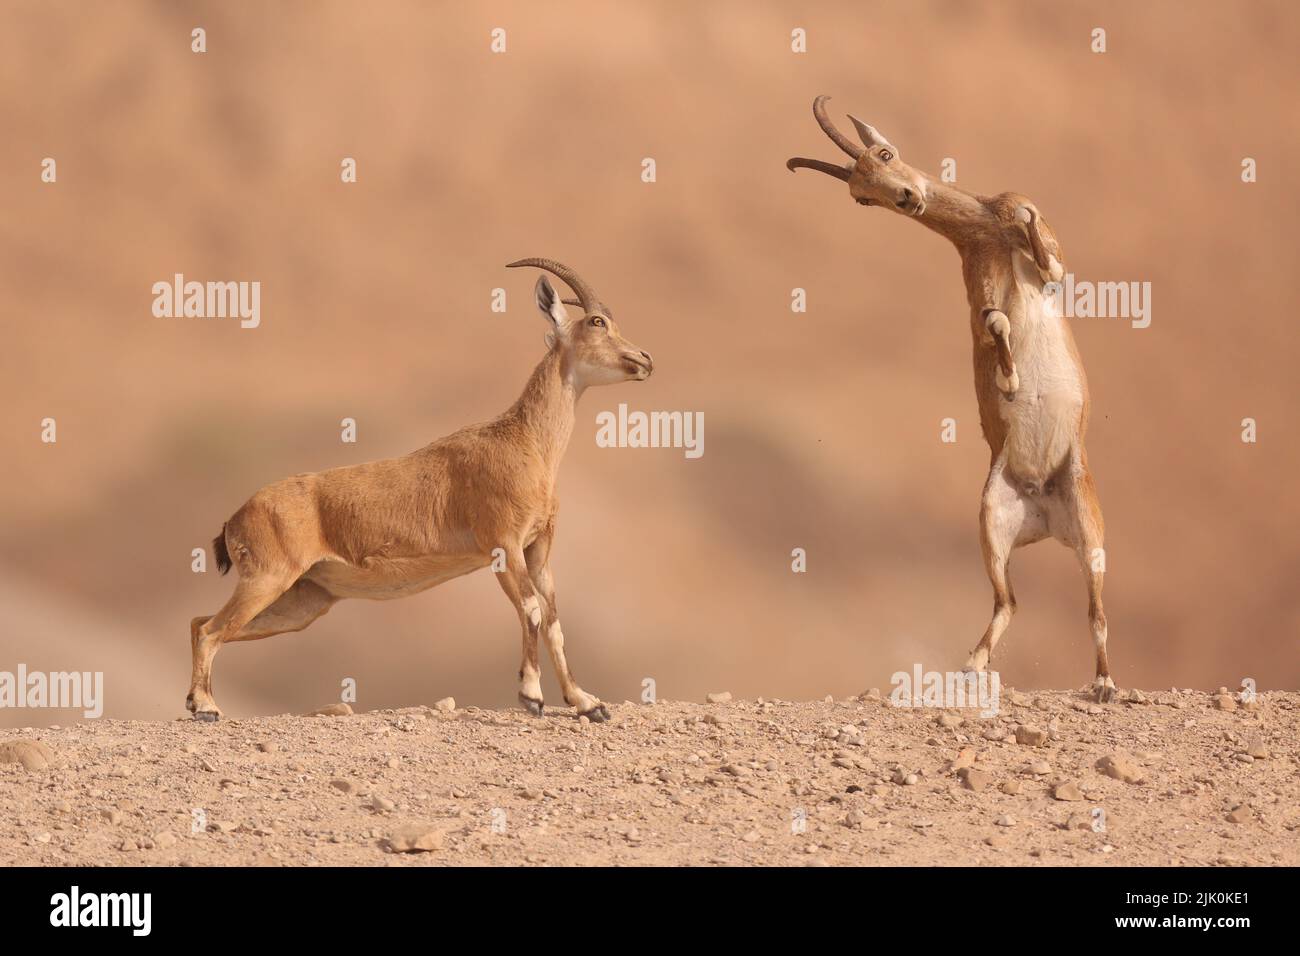 Juvenile Nubian ibex (Capra nubiana) is a desert-dwelling goat species found in mountainous areas of northern and northeast Africa, and the Middle Eas Stock Photo